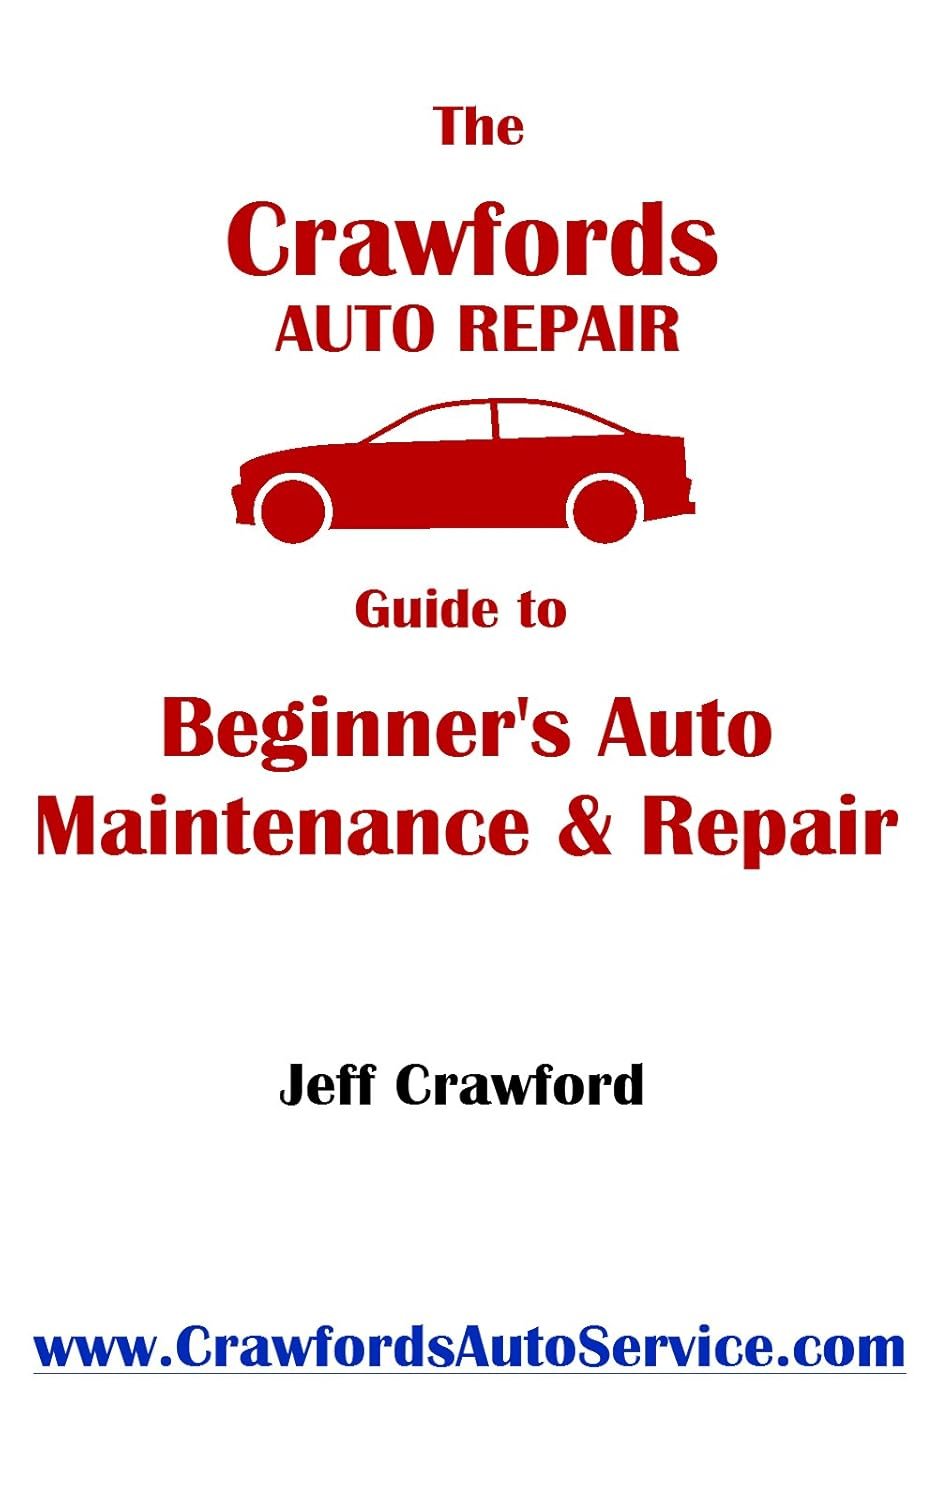 The Crawford’s Auto Repair Guide Review